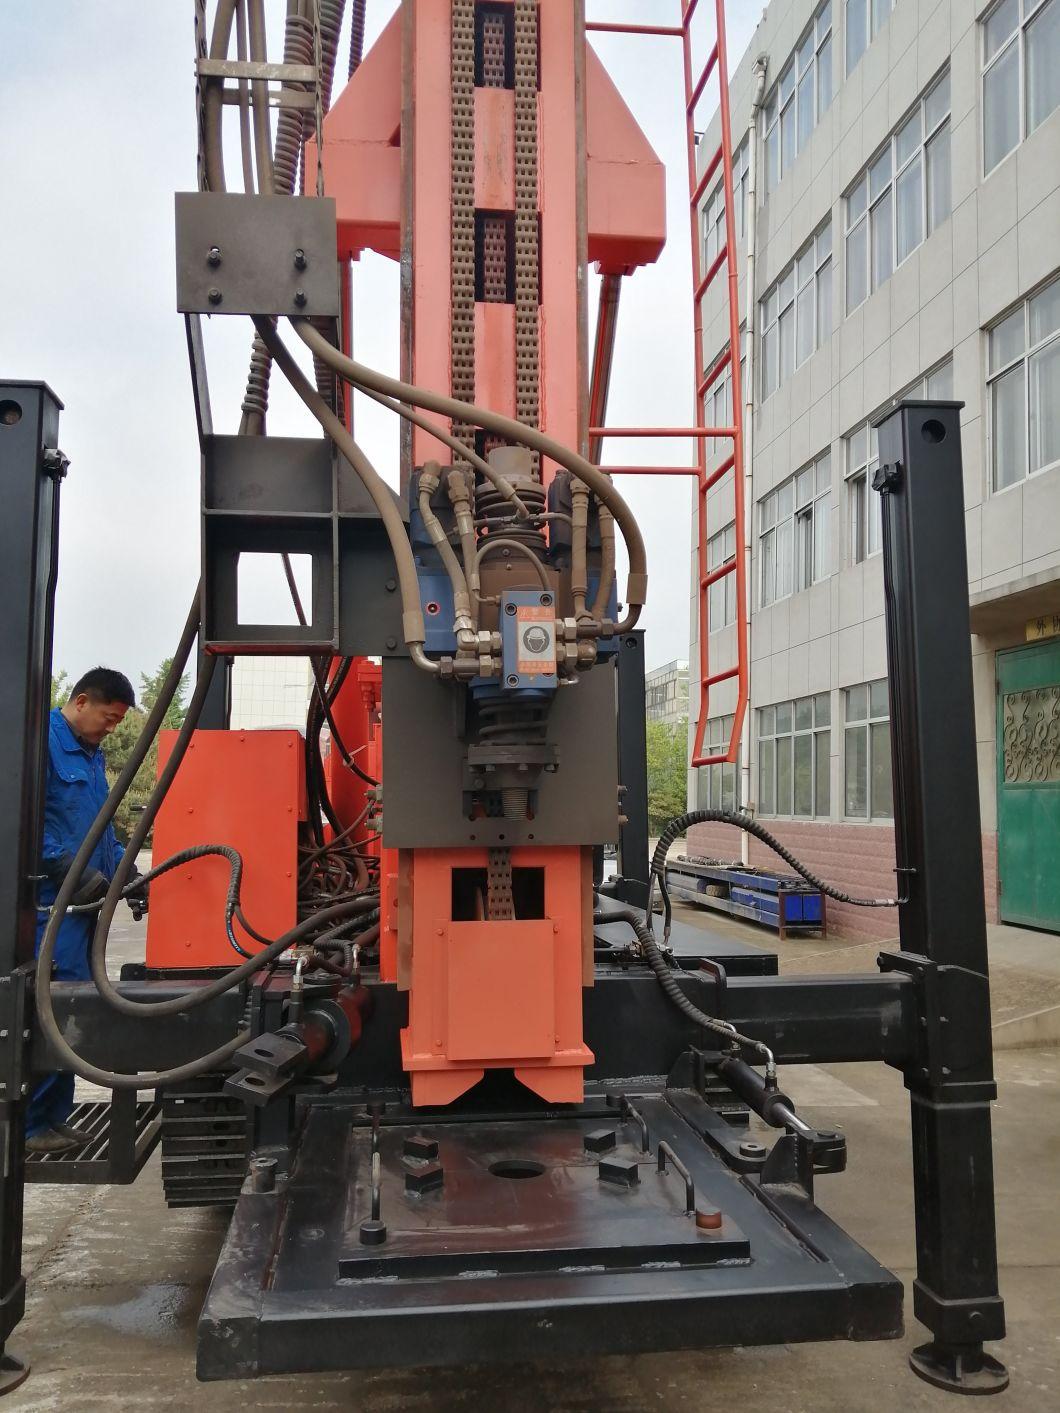 400m 500m 600m Deep Crawler Bore Water Well Drilling Rig Machine for Sale Sly650